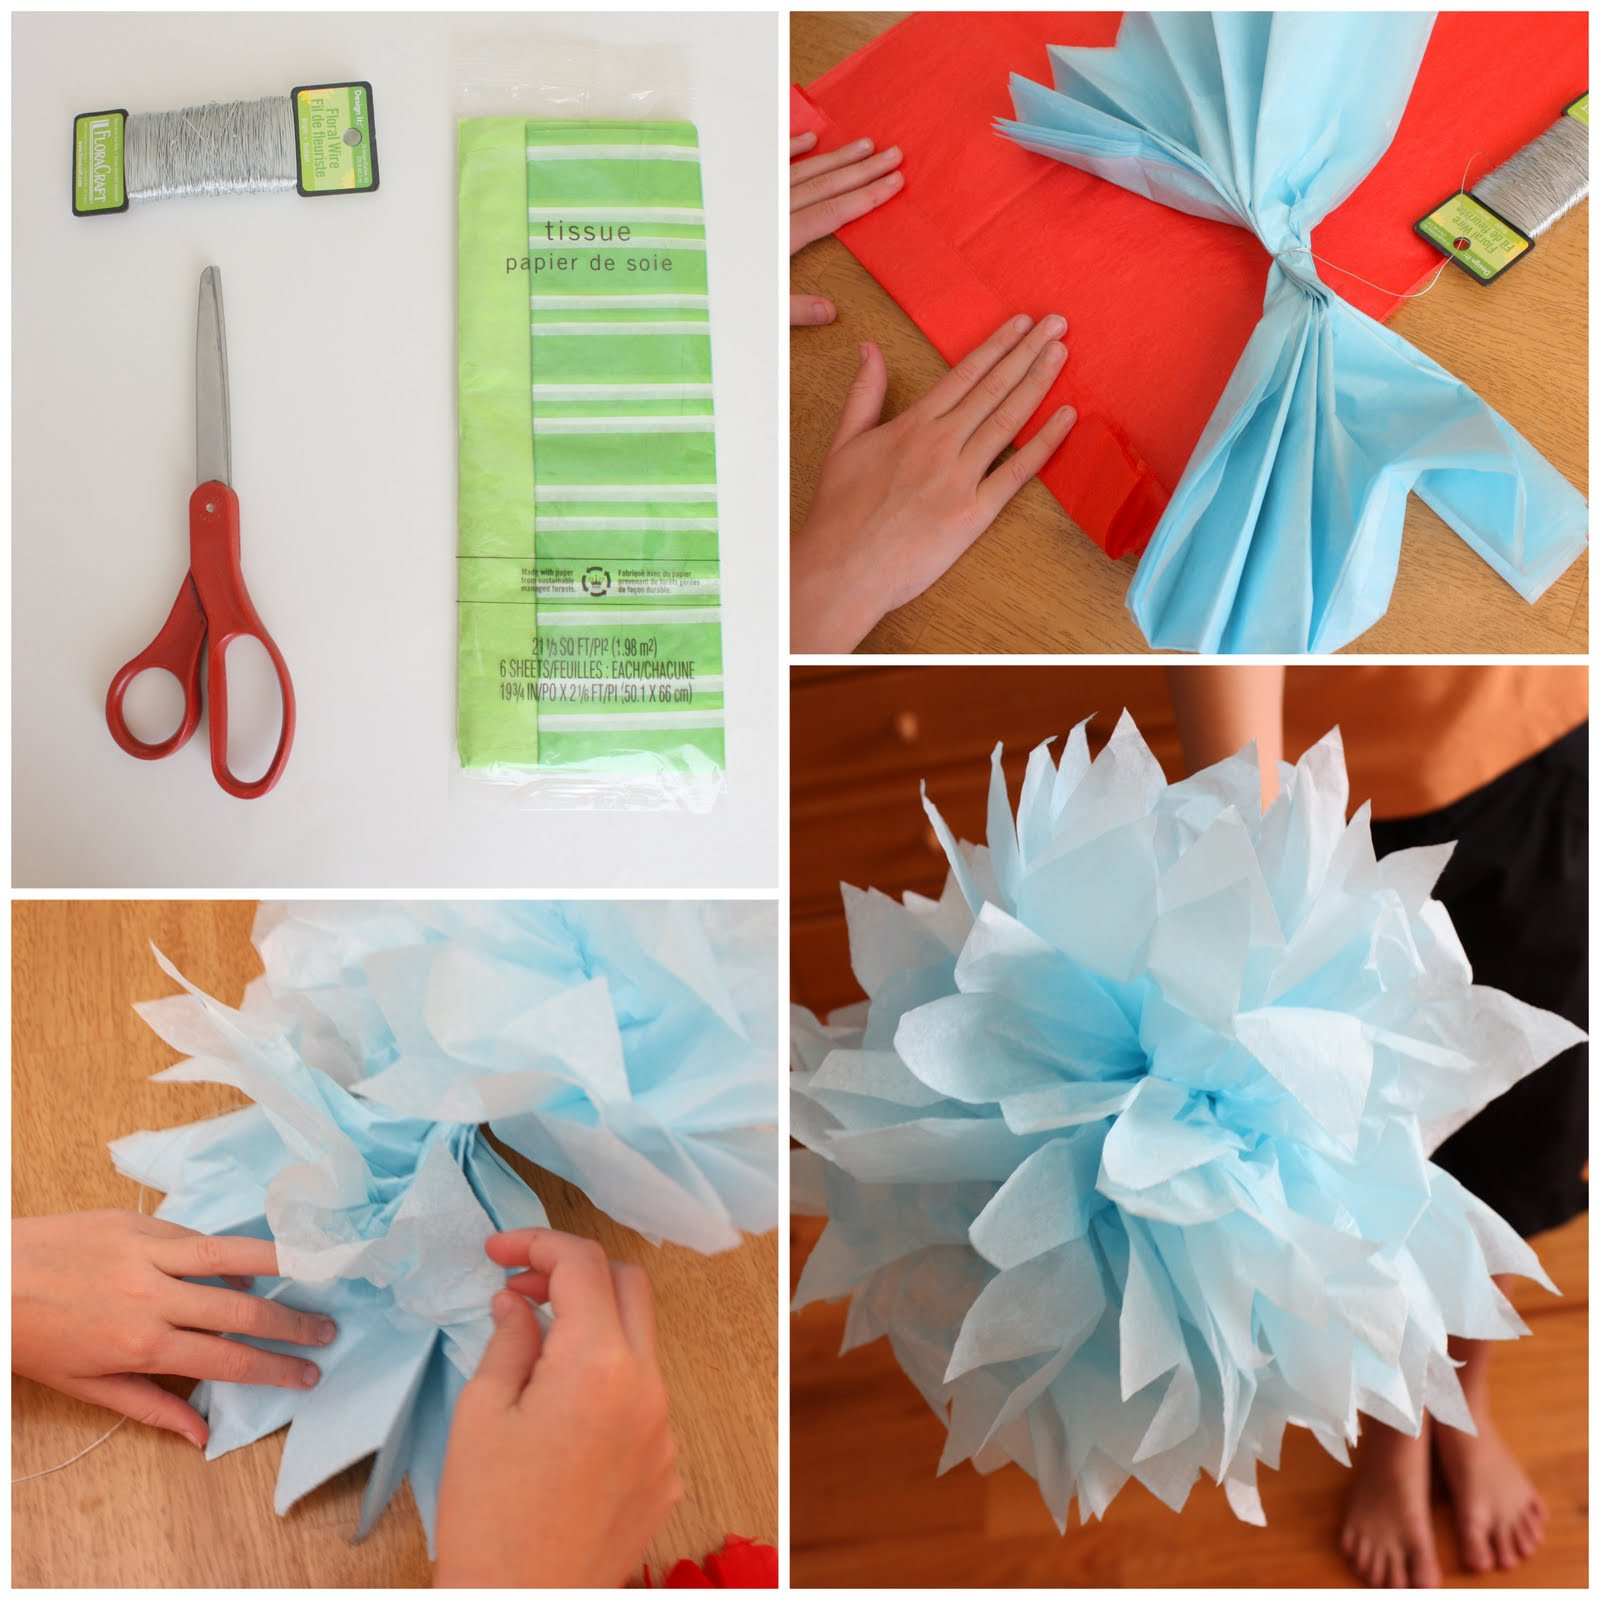 Paper Crafts Ideas For Adults
 Tissue Paper Crafts For Adults Paper Crafts Ideas for Kids